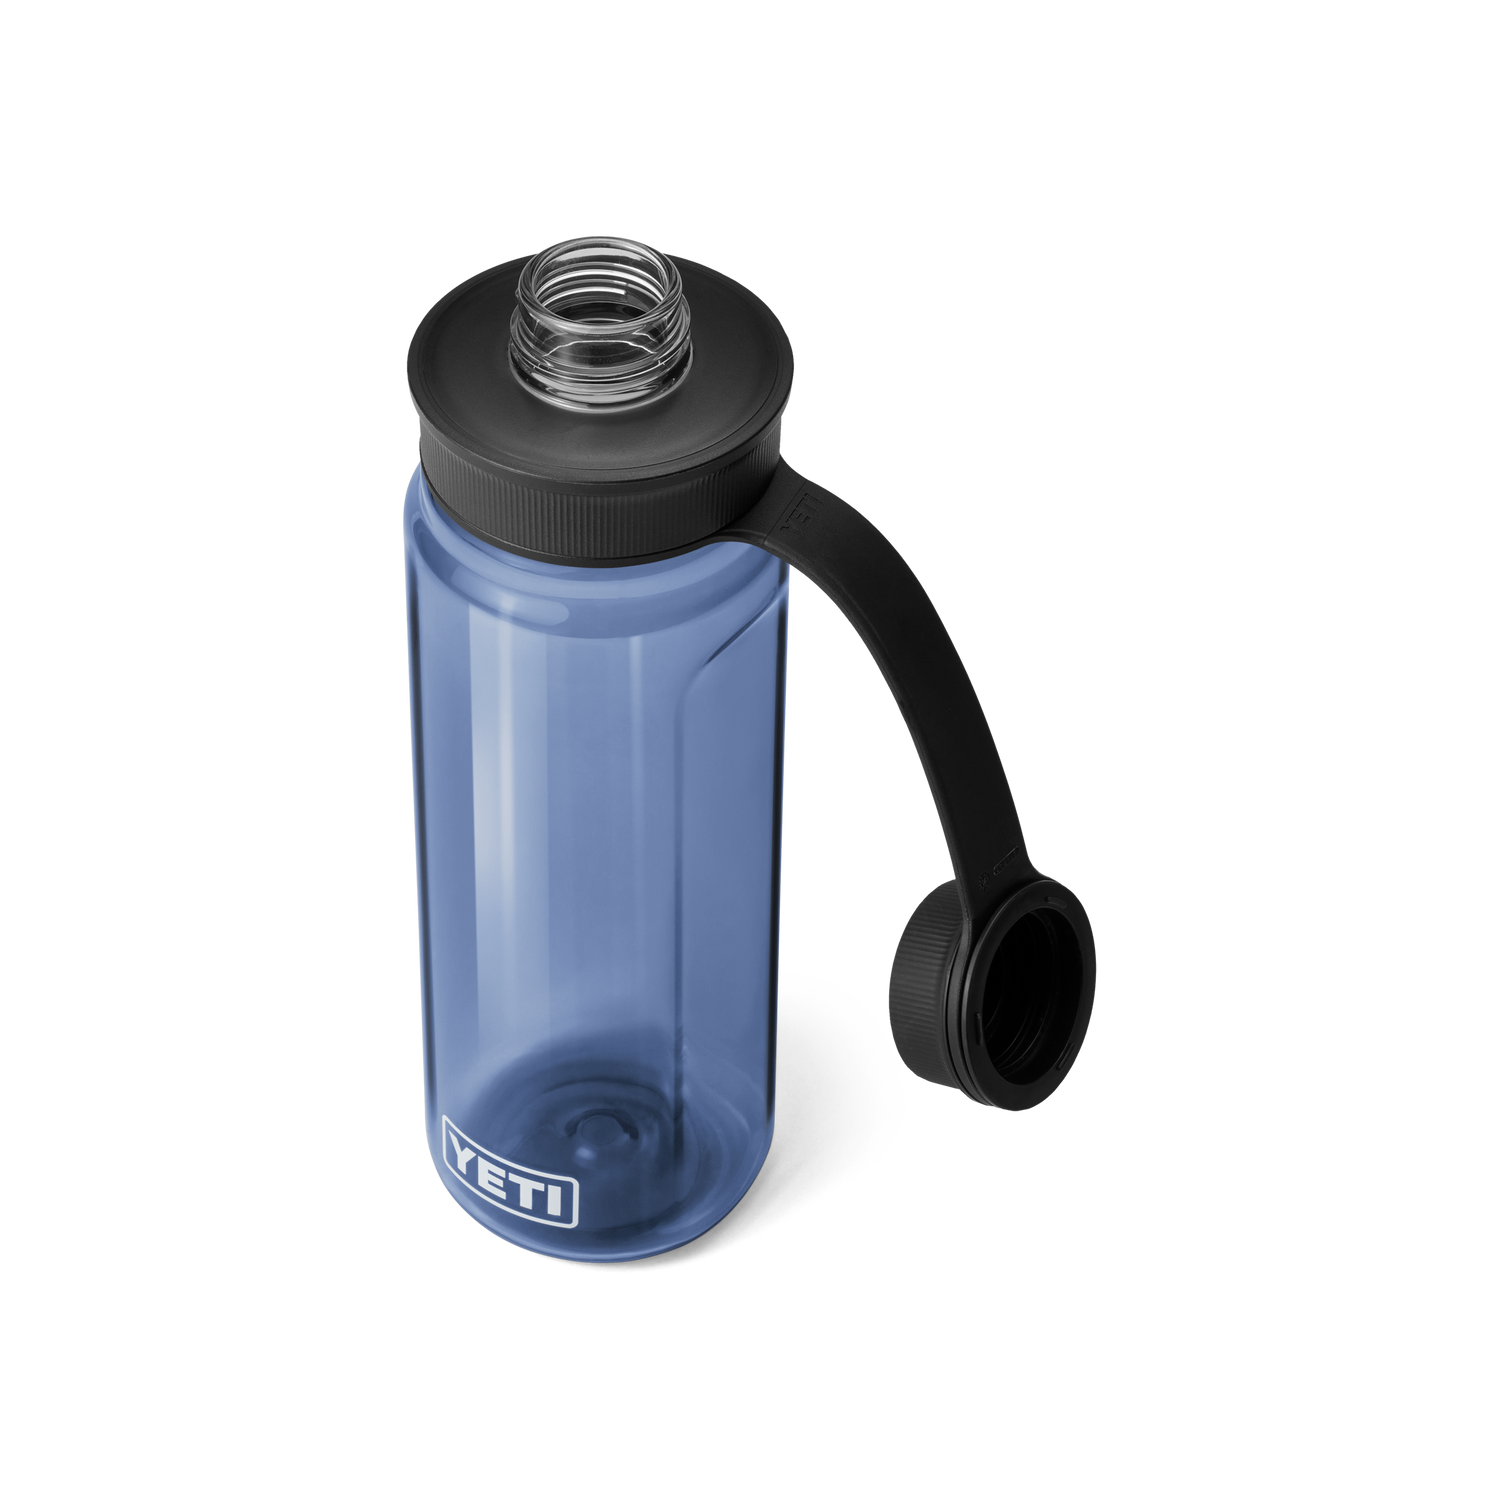 site_studio_Drinkware_Yonder_Tether_Accs_750mL_Navy_3qtr_Open_0842_Primary_B_2400x2400.png